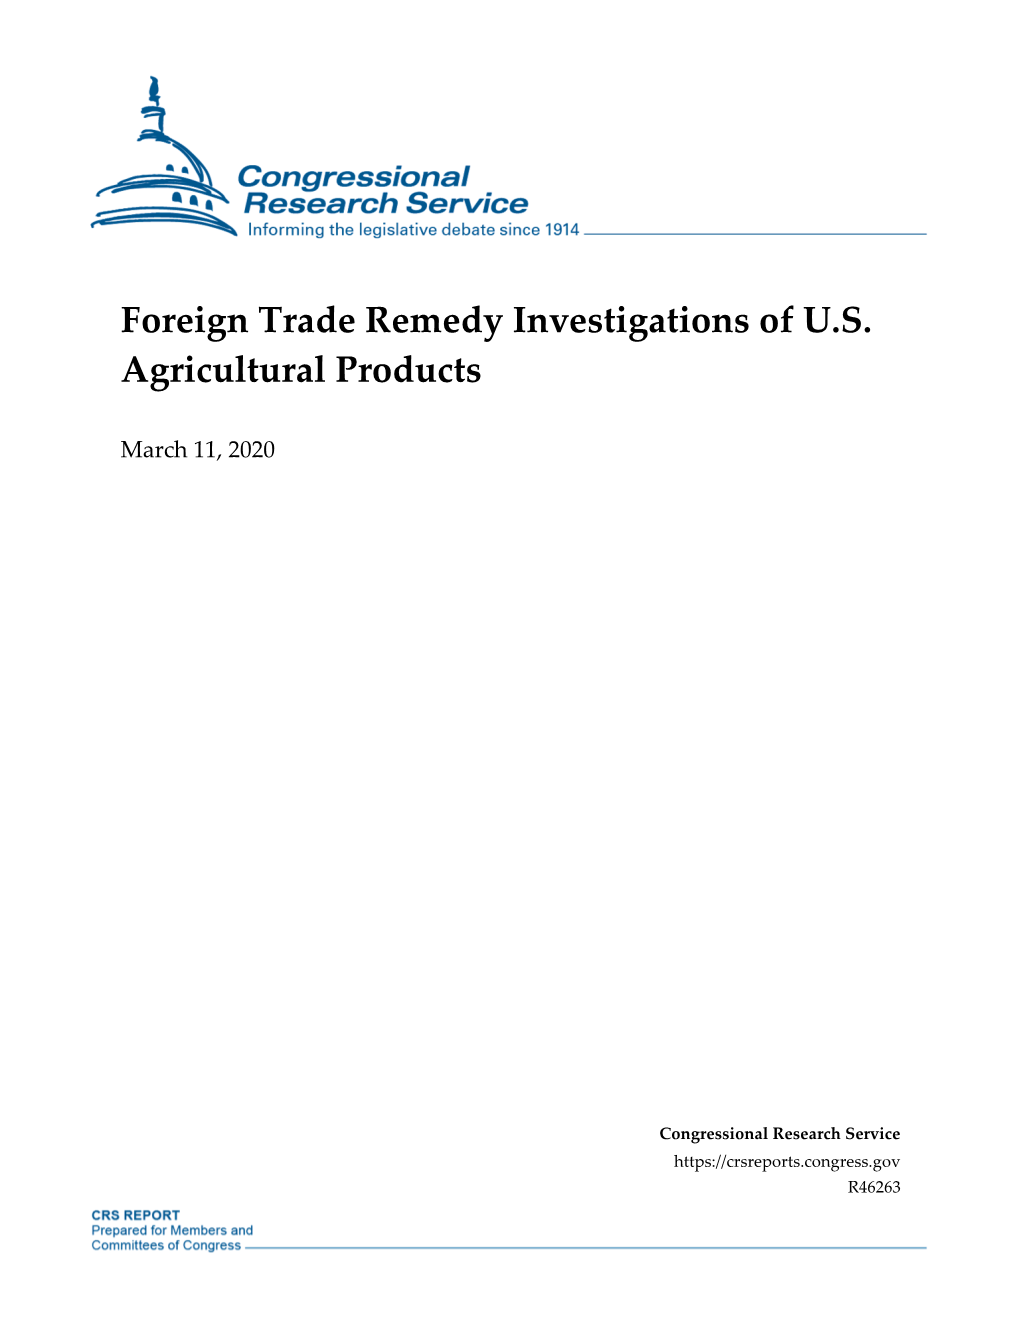 Foreign Trade Remedy Investigations of U.S. Agricultural Products